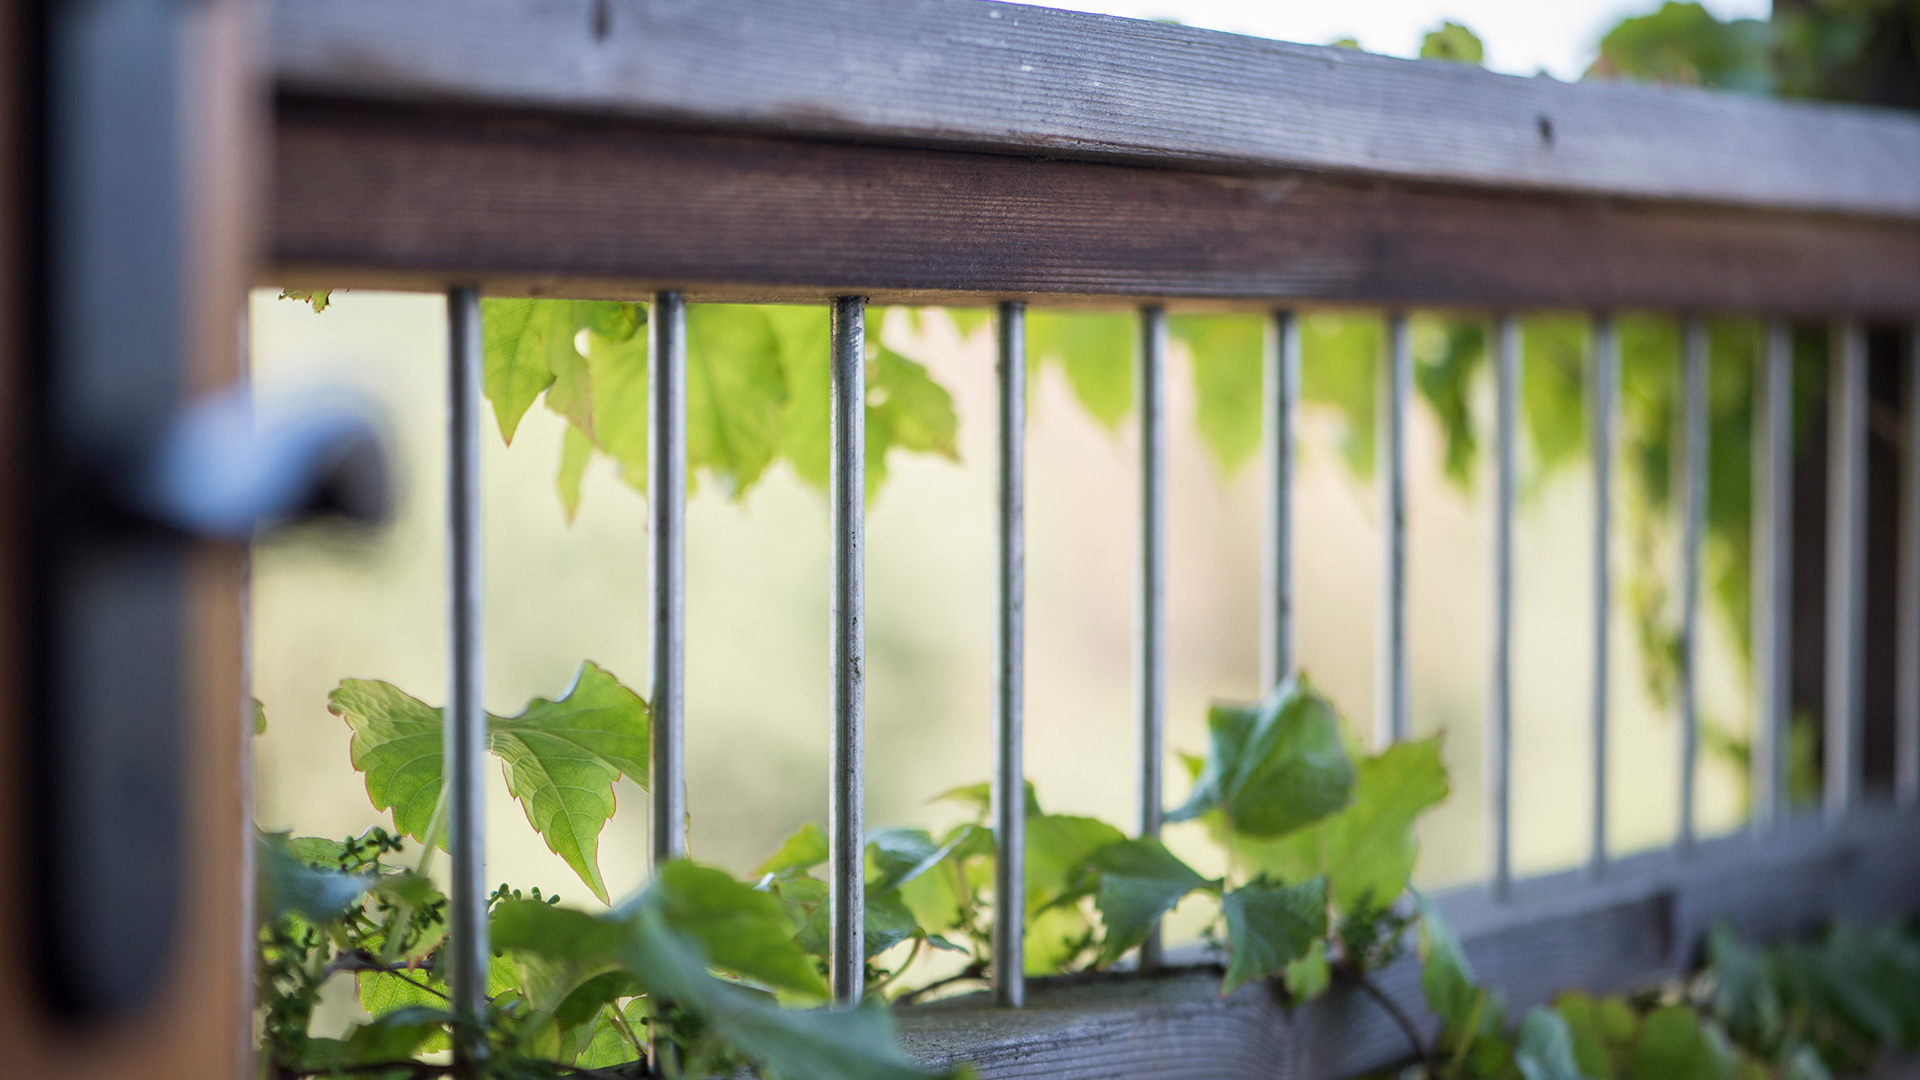 Outdoor wooden railing with thin metal baluster. Ivy in background and creeping through bars.